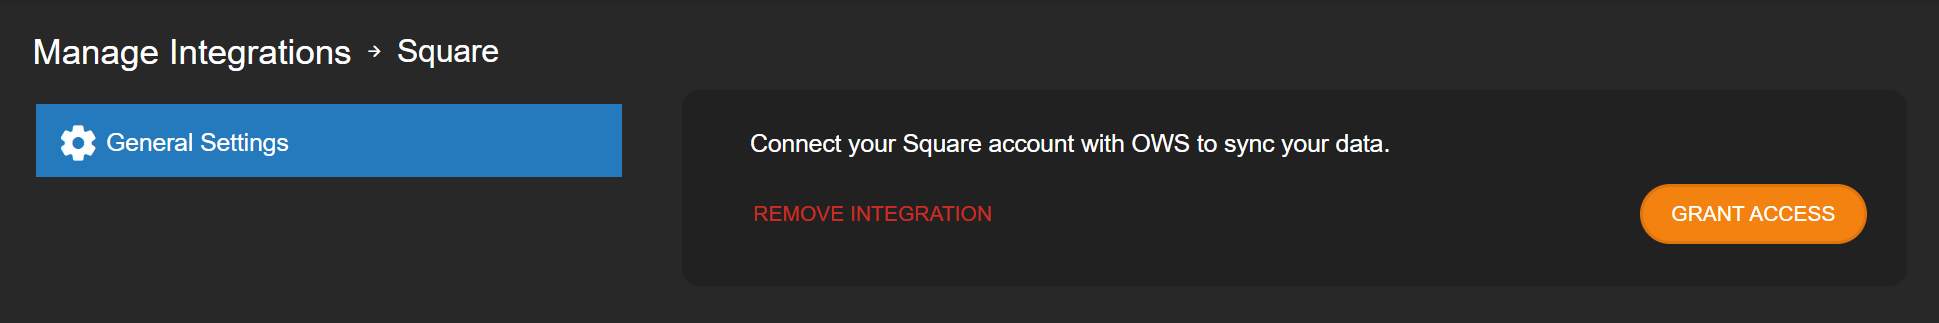 Square Manage Integrations Grant Access.png